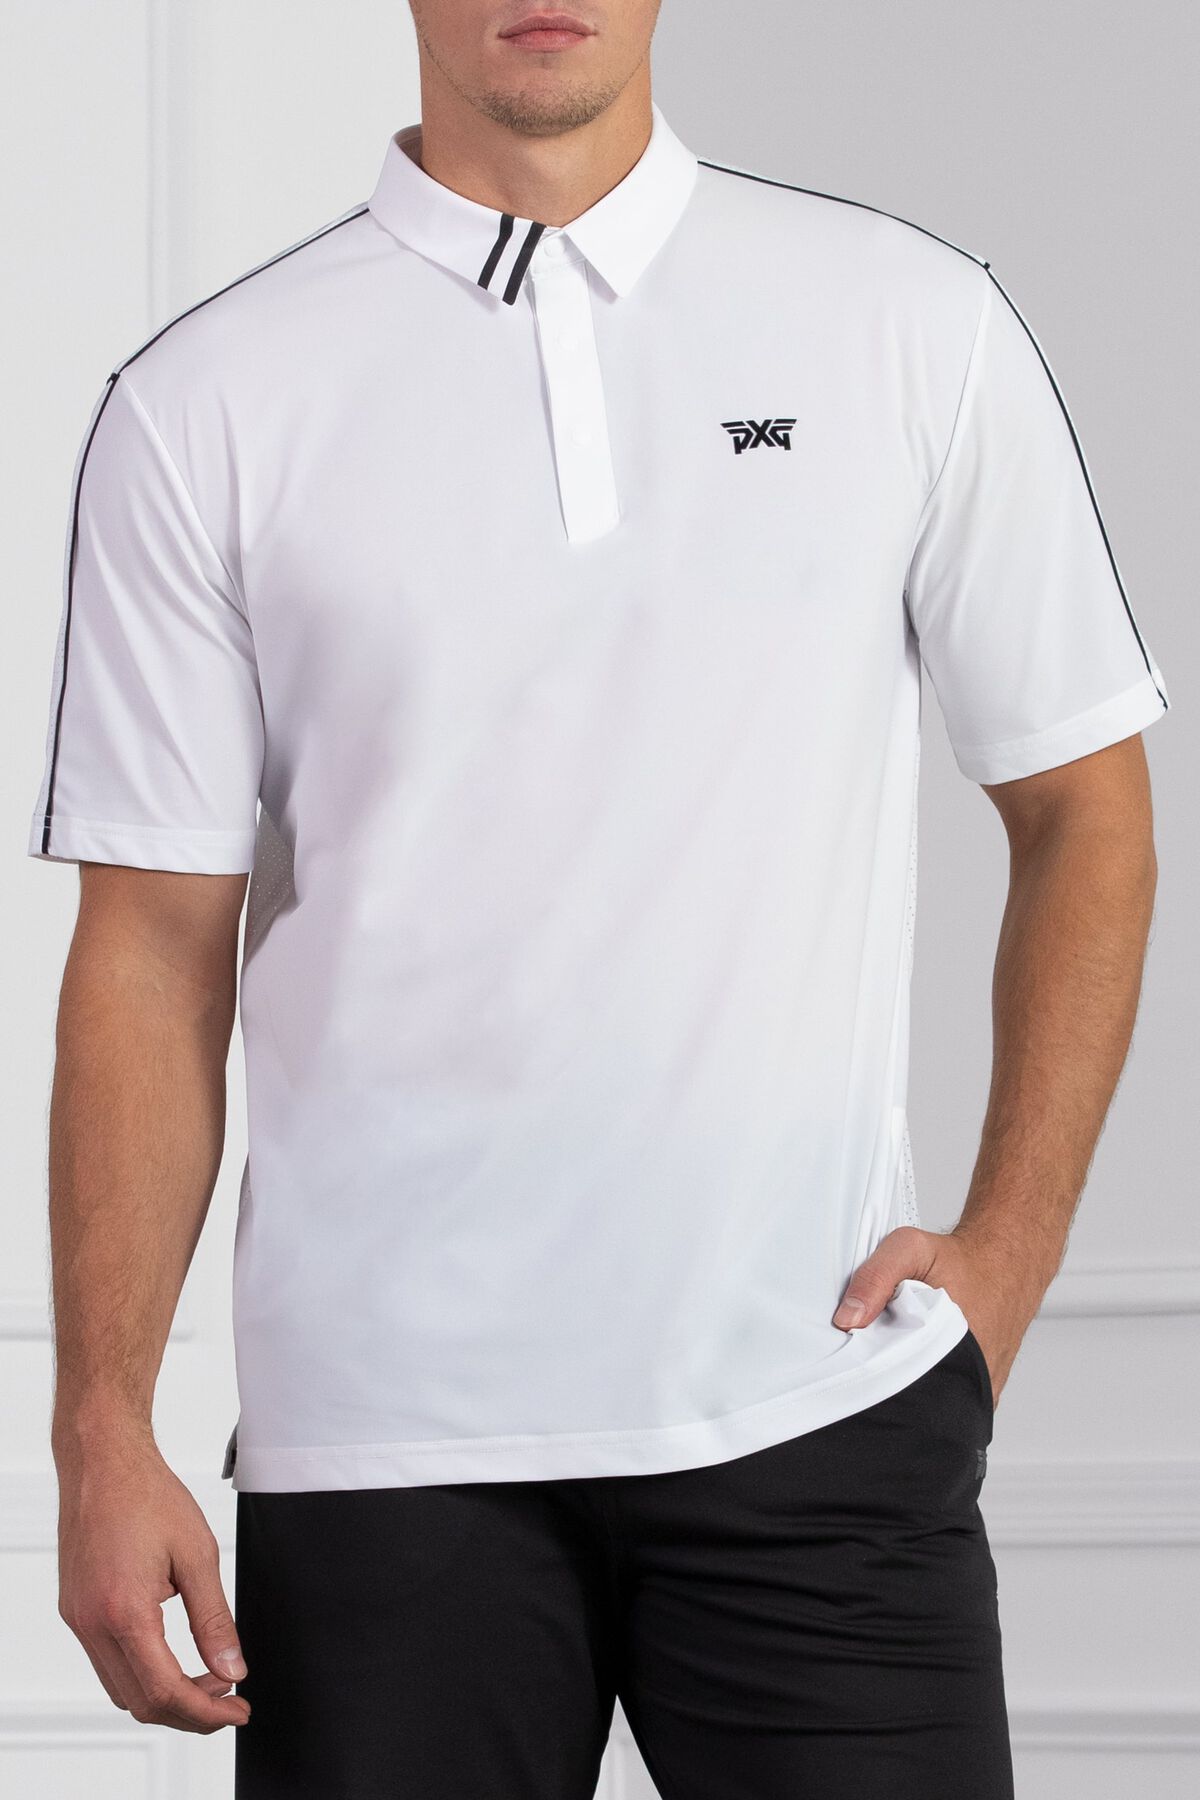 Long Sleeve Airo Lightweight Polo  Shop the Highest Quality Golf Apparel,  Gear, Accessories and Golf Clubs at PXG